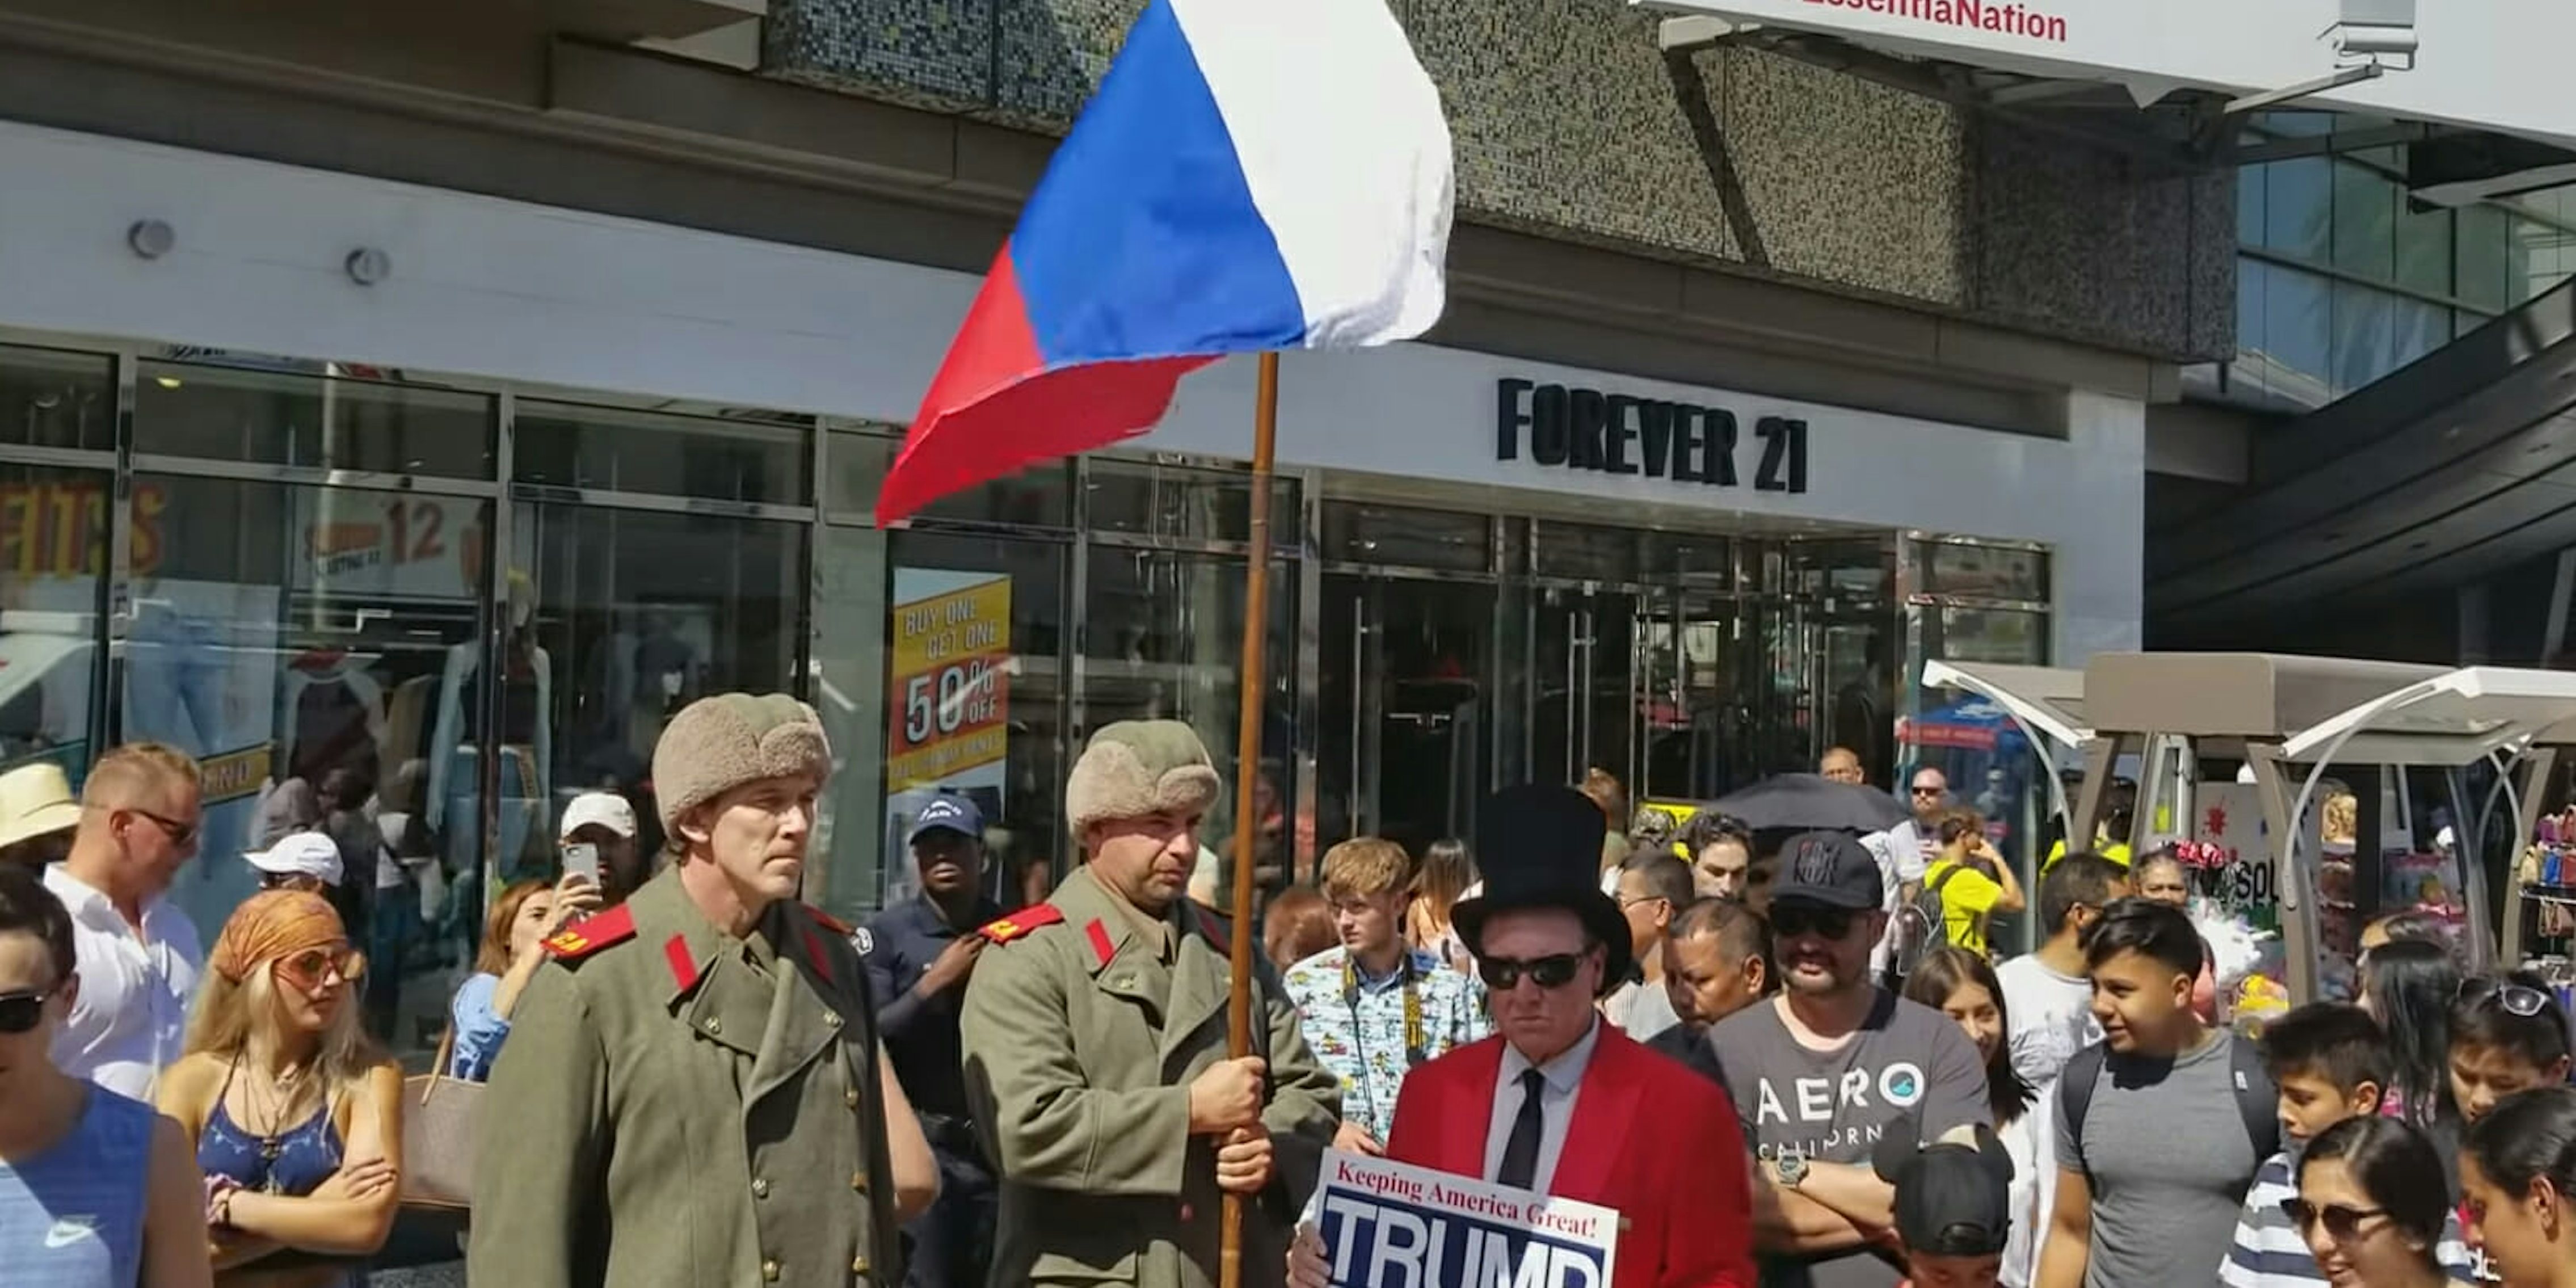 Two people dressed as Russian soldiers were spotted guarding President Donald Trump's Hollywood Walk of Fame star last week.